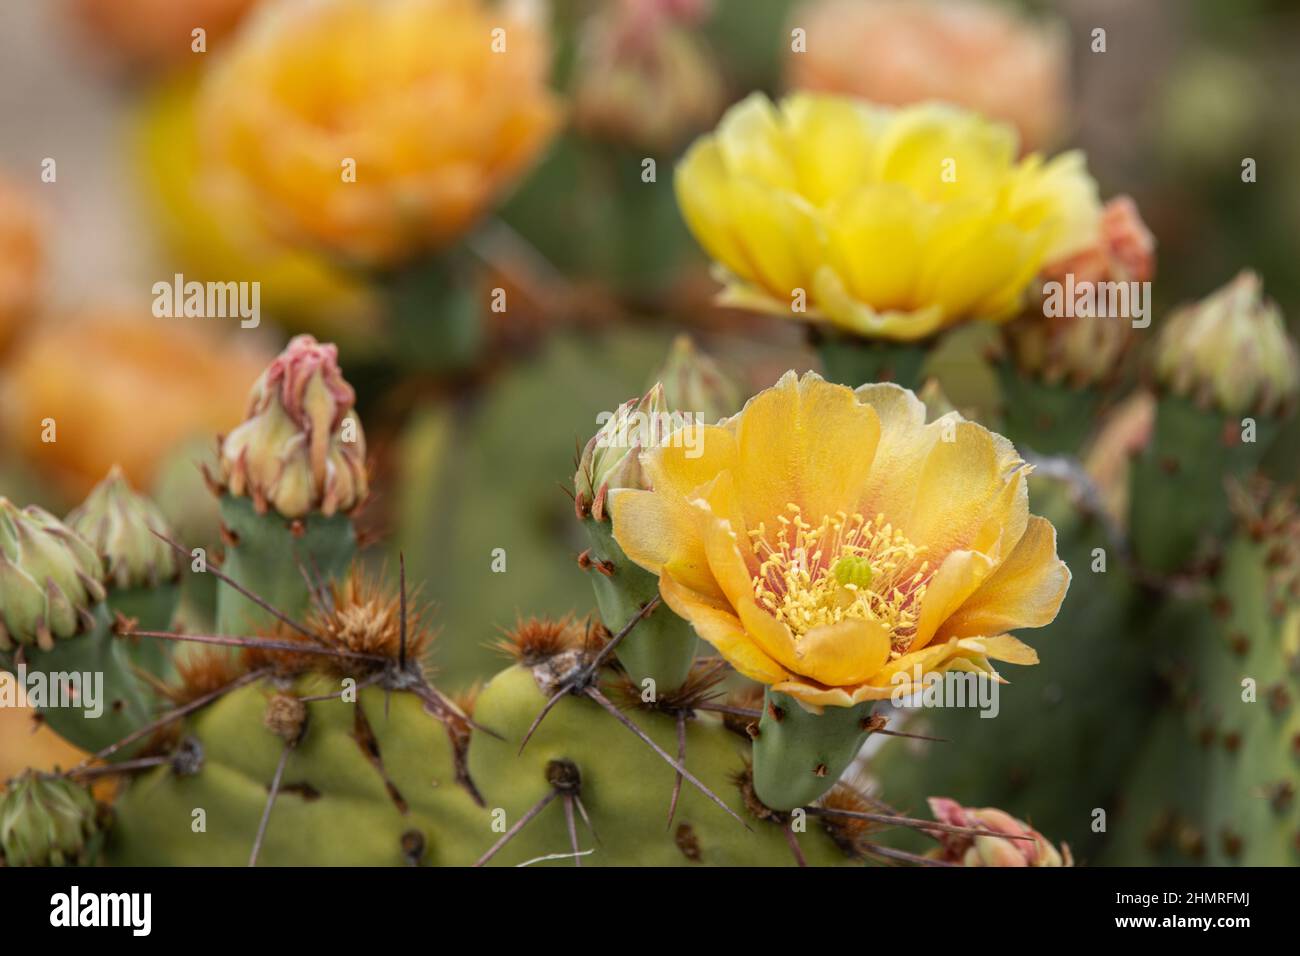 Comanche Prickly Pear puts on a vivid display of yellow blooms that fade to apricot. Stock Photo